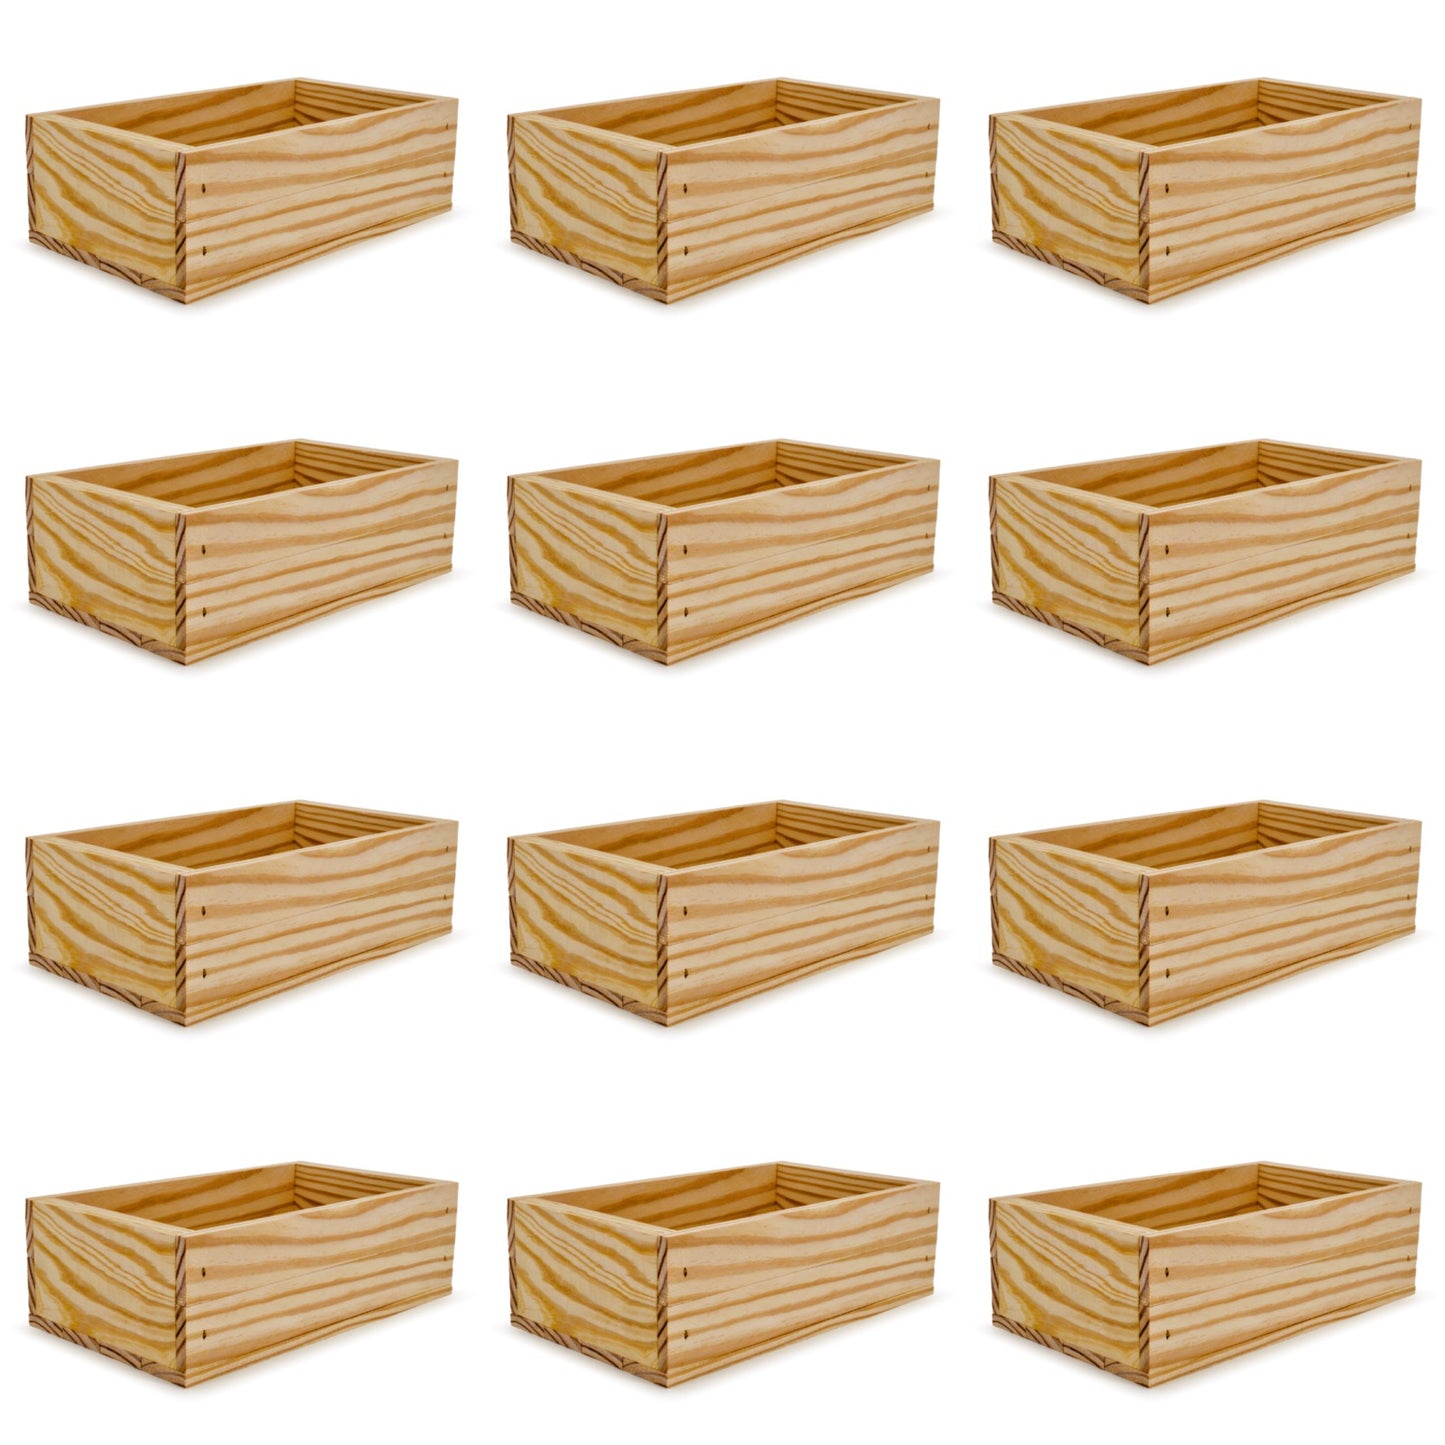 12 Small wooden crates 11x6.25x3.5